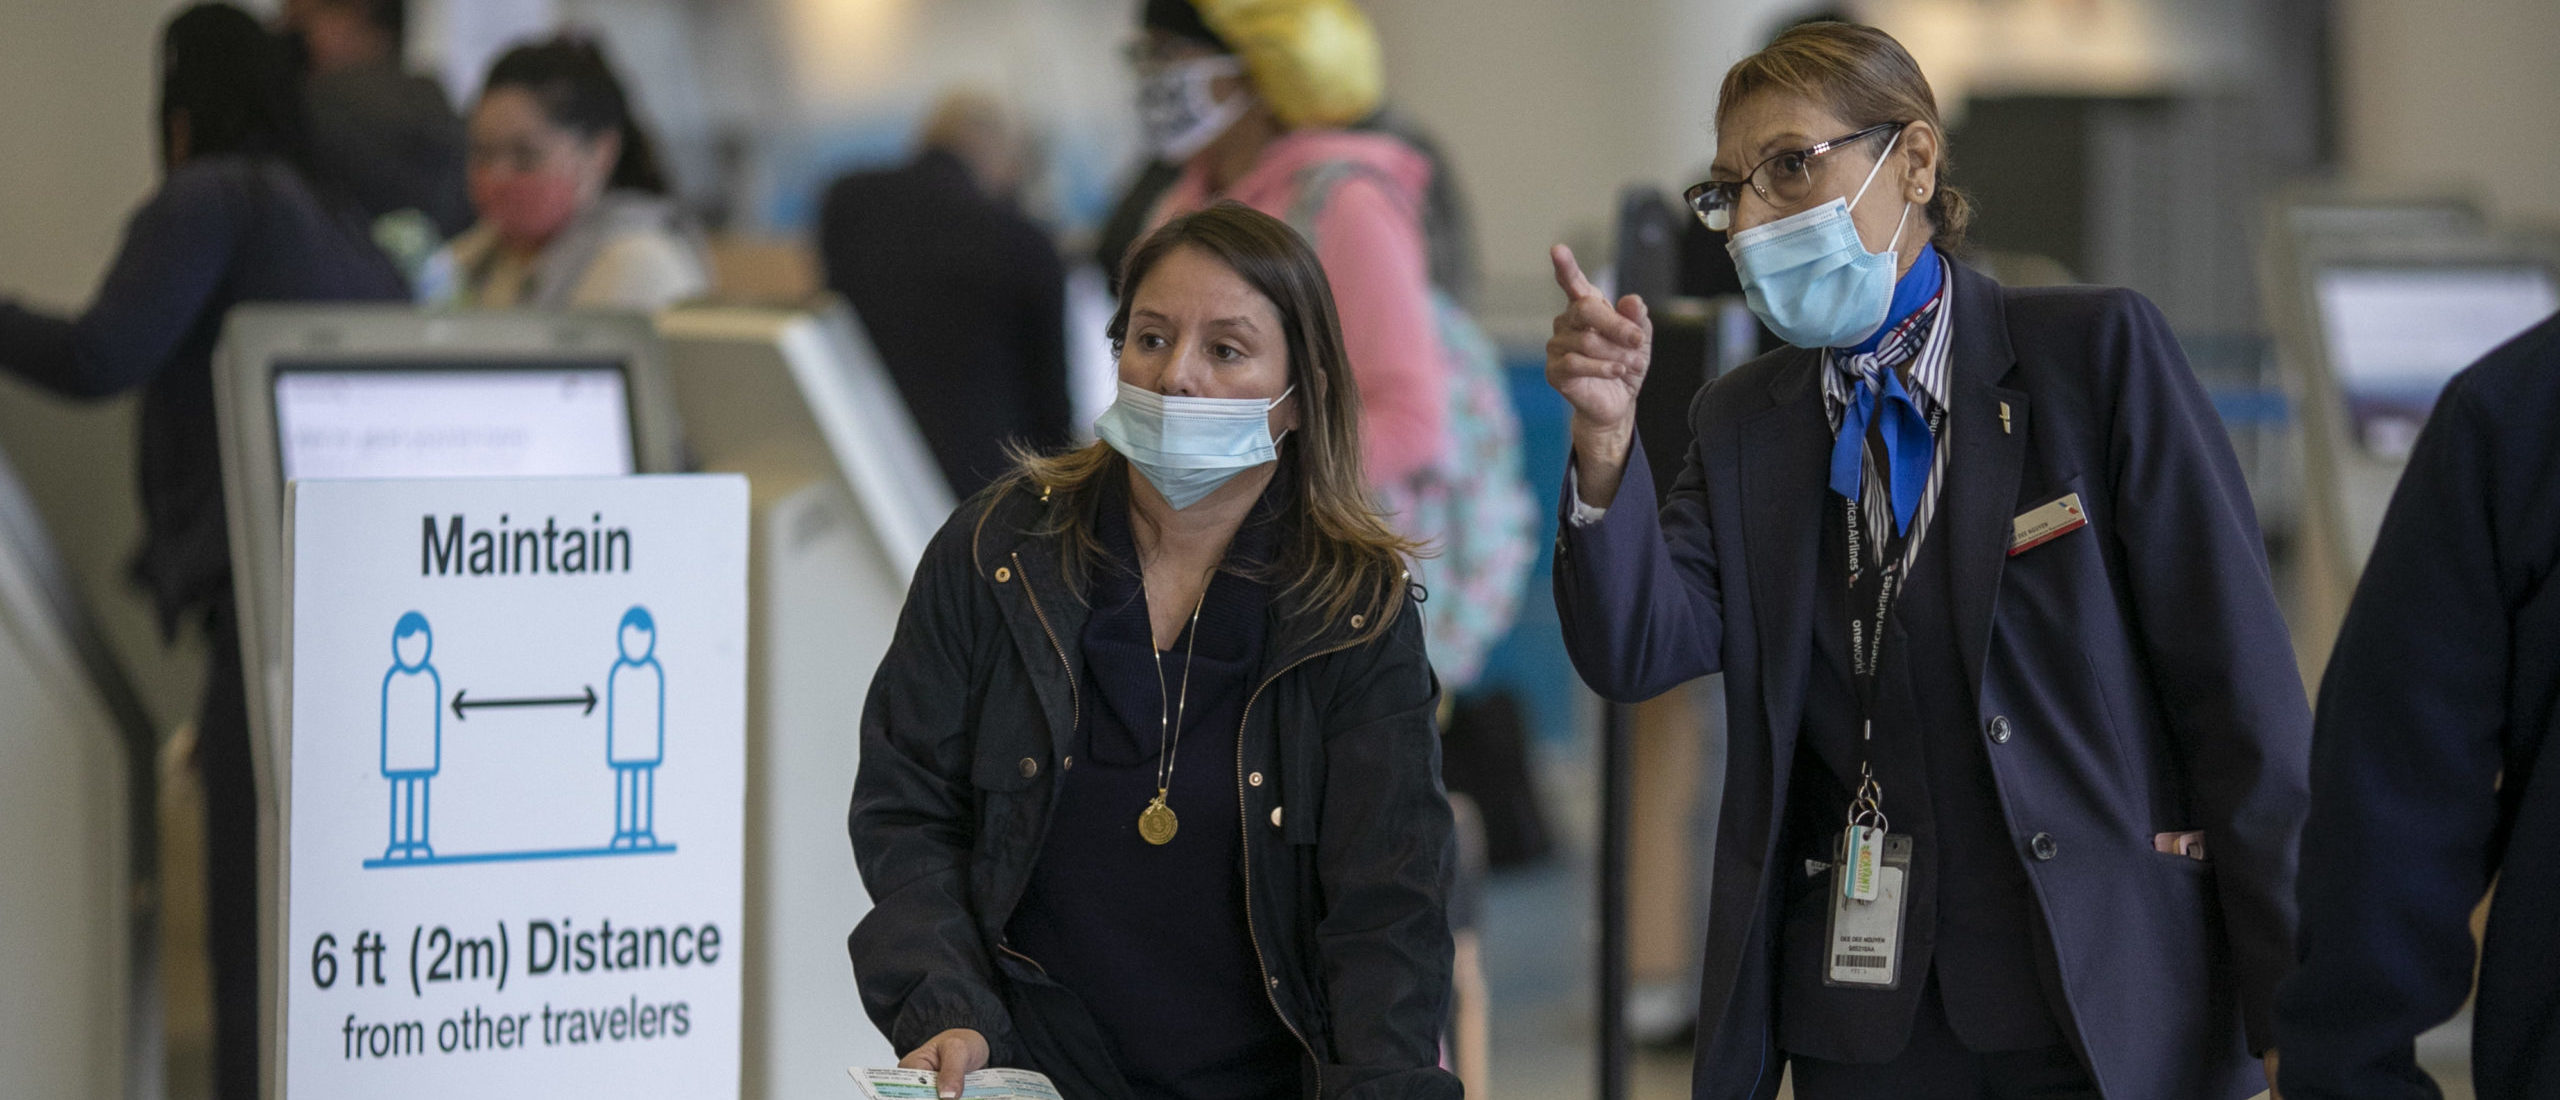 Domestic travelers will not need a negative coronavirus test before flying, says the CDC